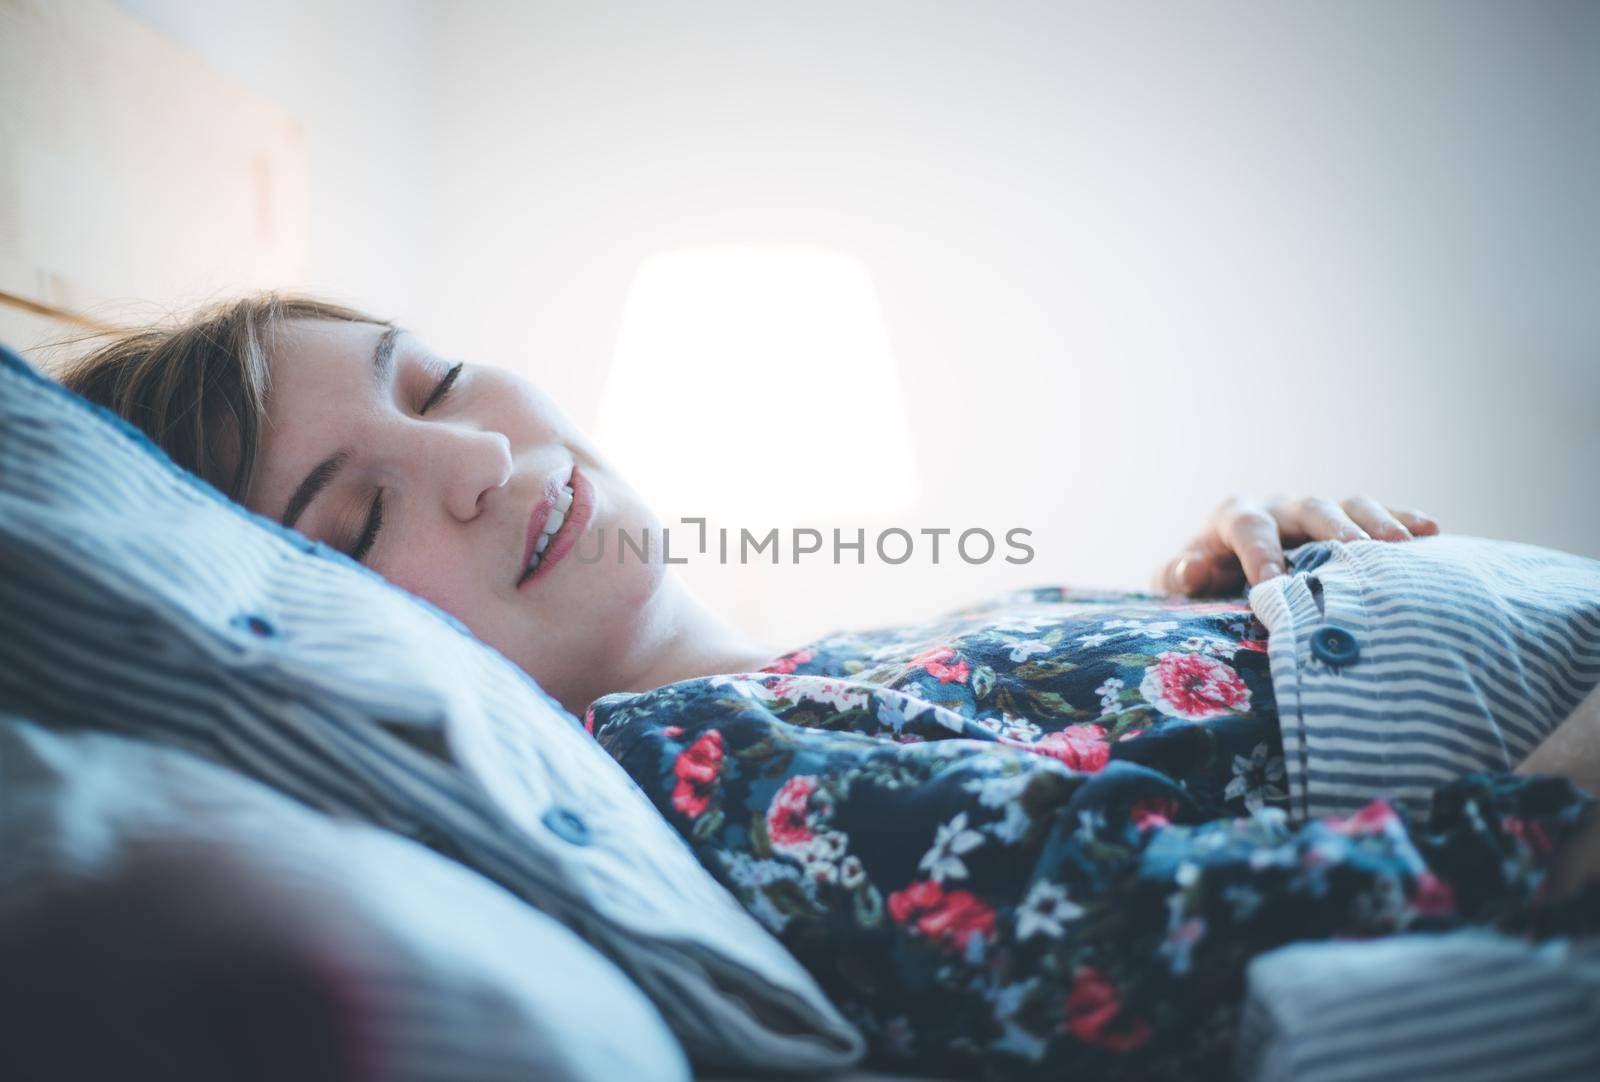 Young woman sleeping peacefully in her bedroom, day